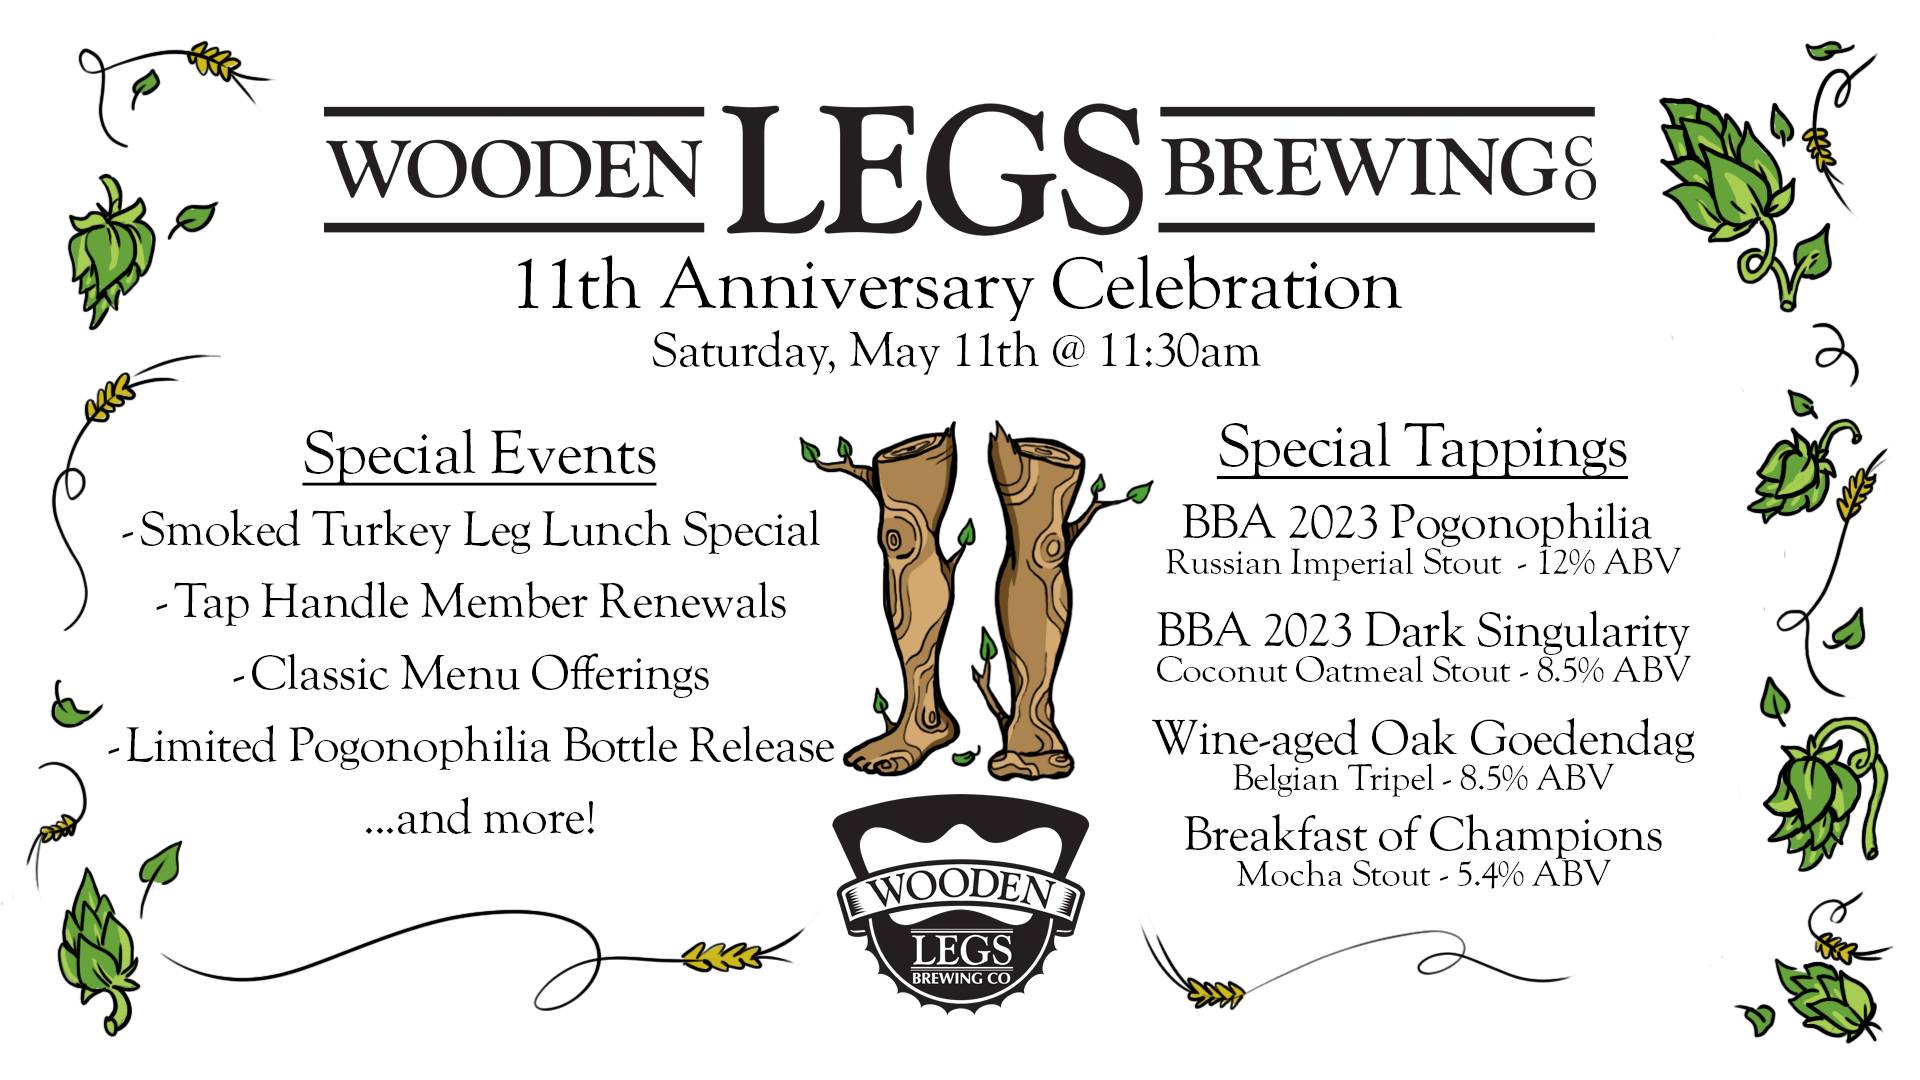 Wooden Legs Brewing Company’s 11th Anniversary Celebration